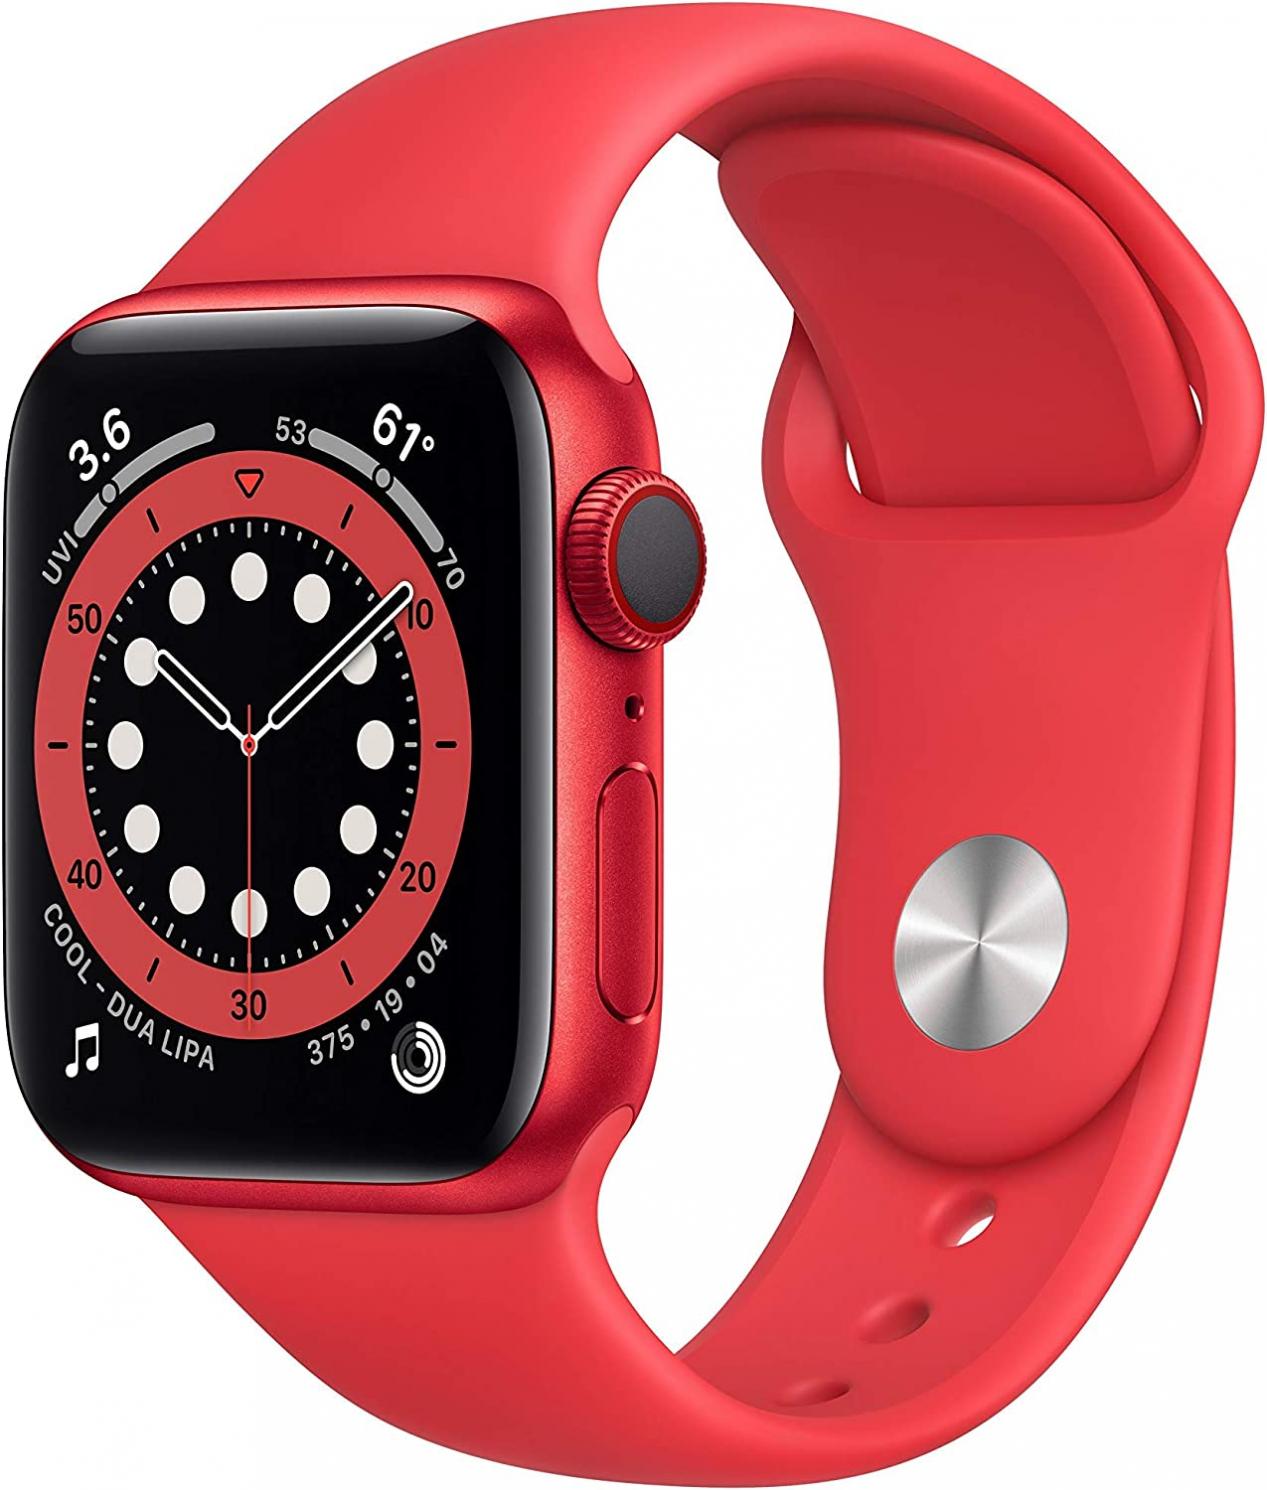 Apple Watch Series 6 (GPS + Cellular, 40mm) - (Product) RED Aluminum Case with RED Sport Band (Renewed)